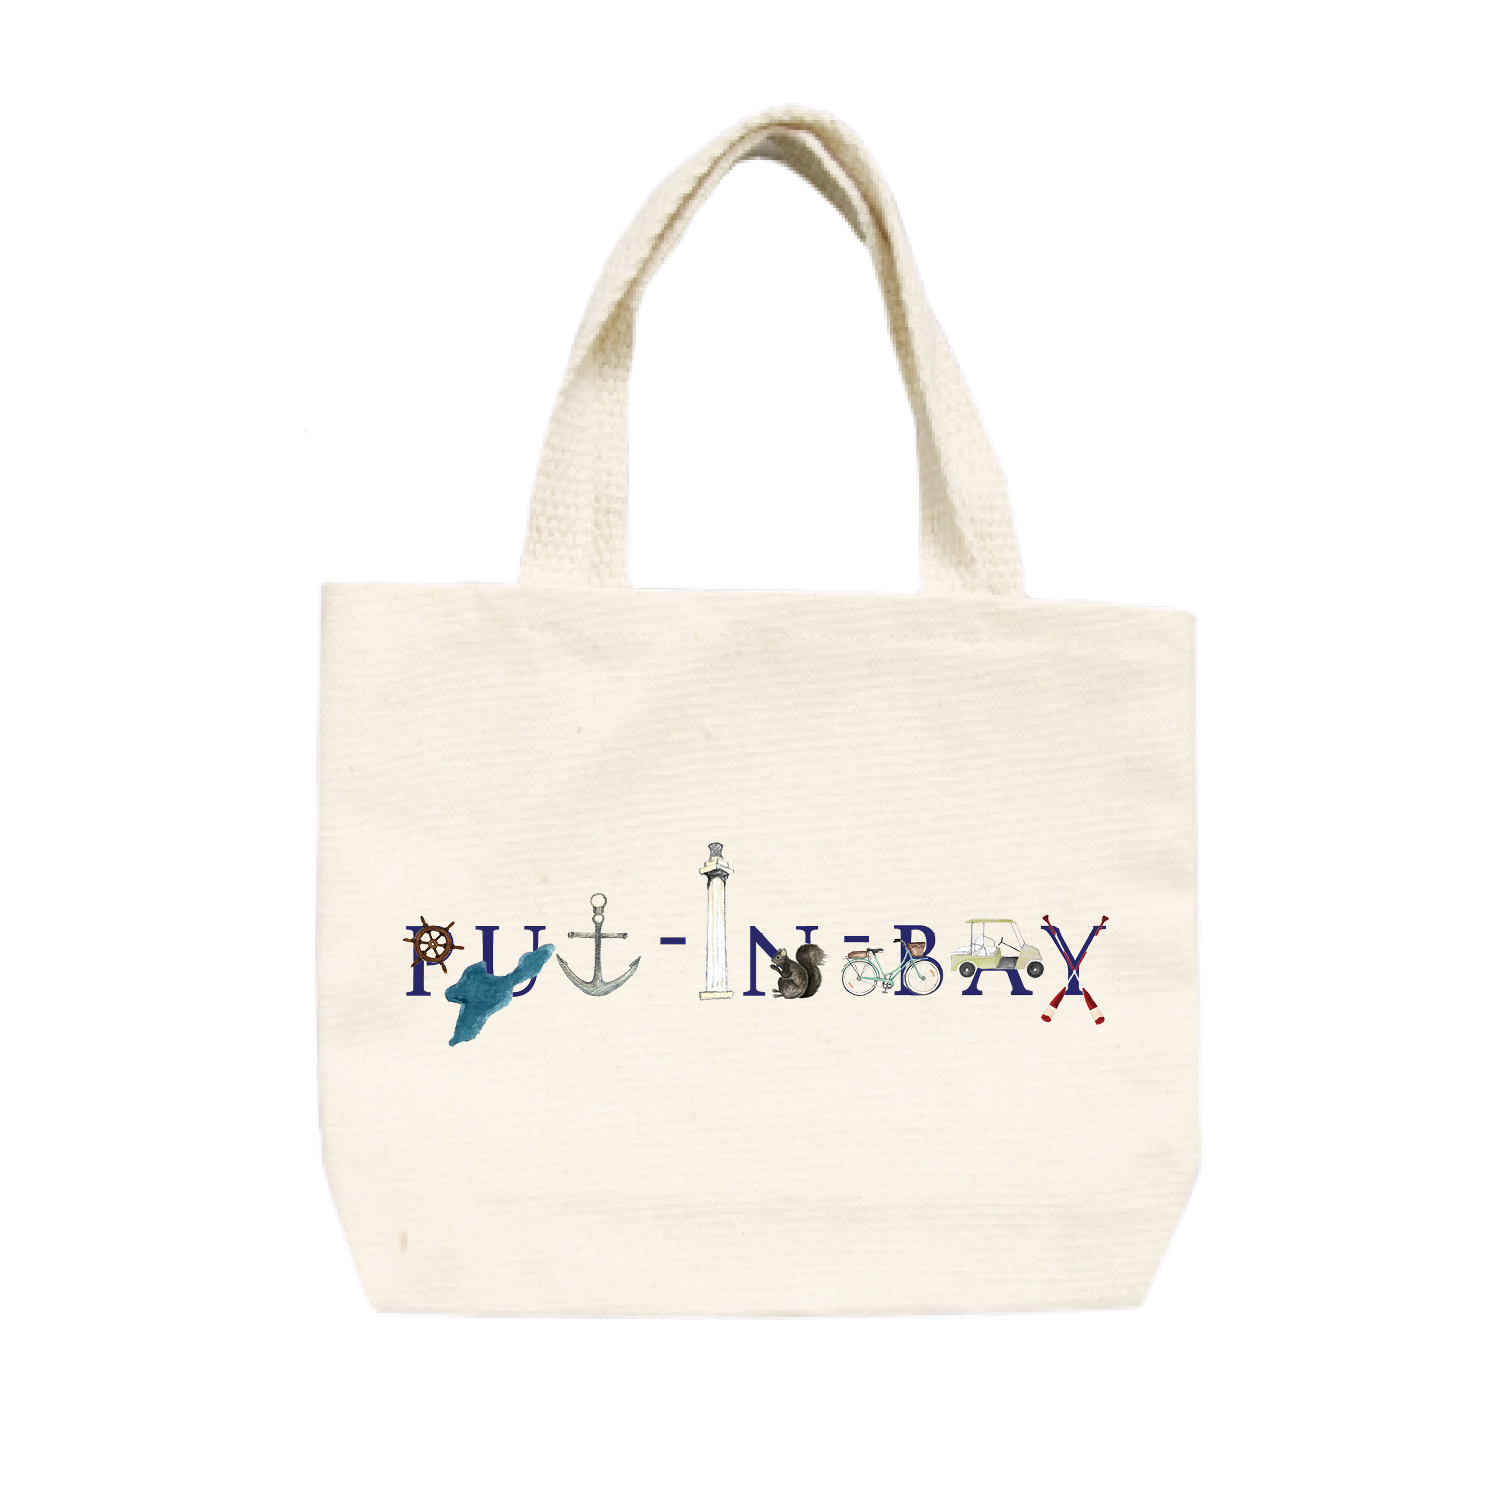 put-in-bay small tote